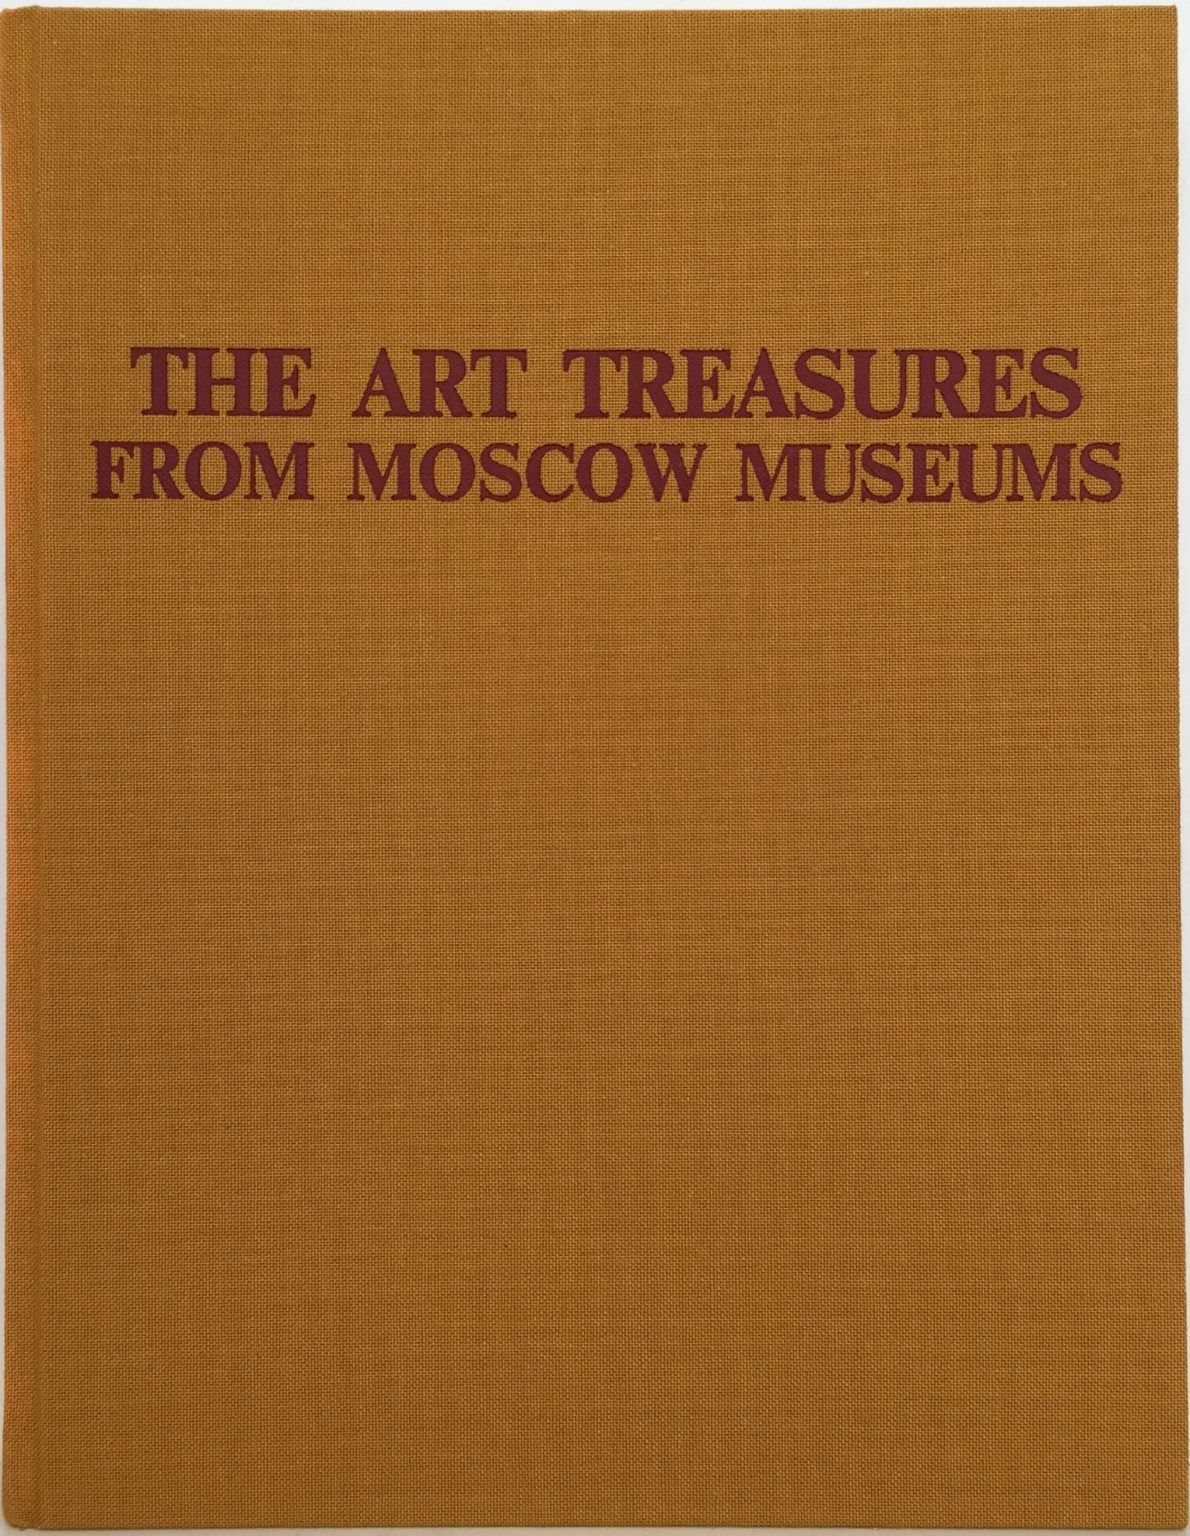 THE ART TREASURES FROM MOSCOW MUSEUMS